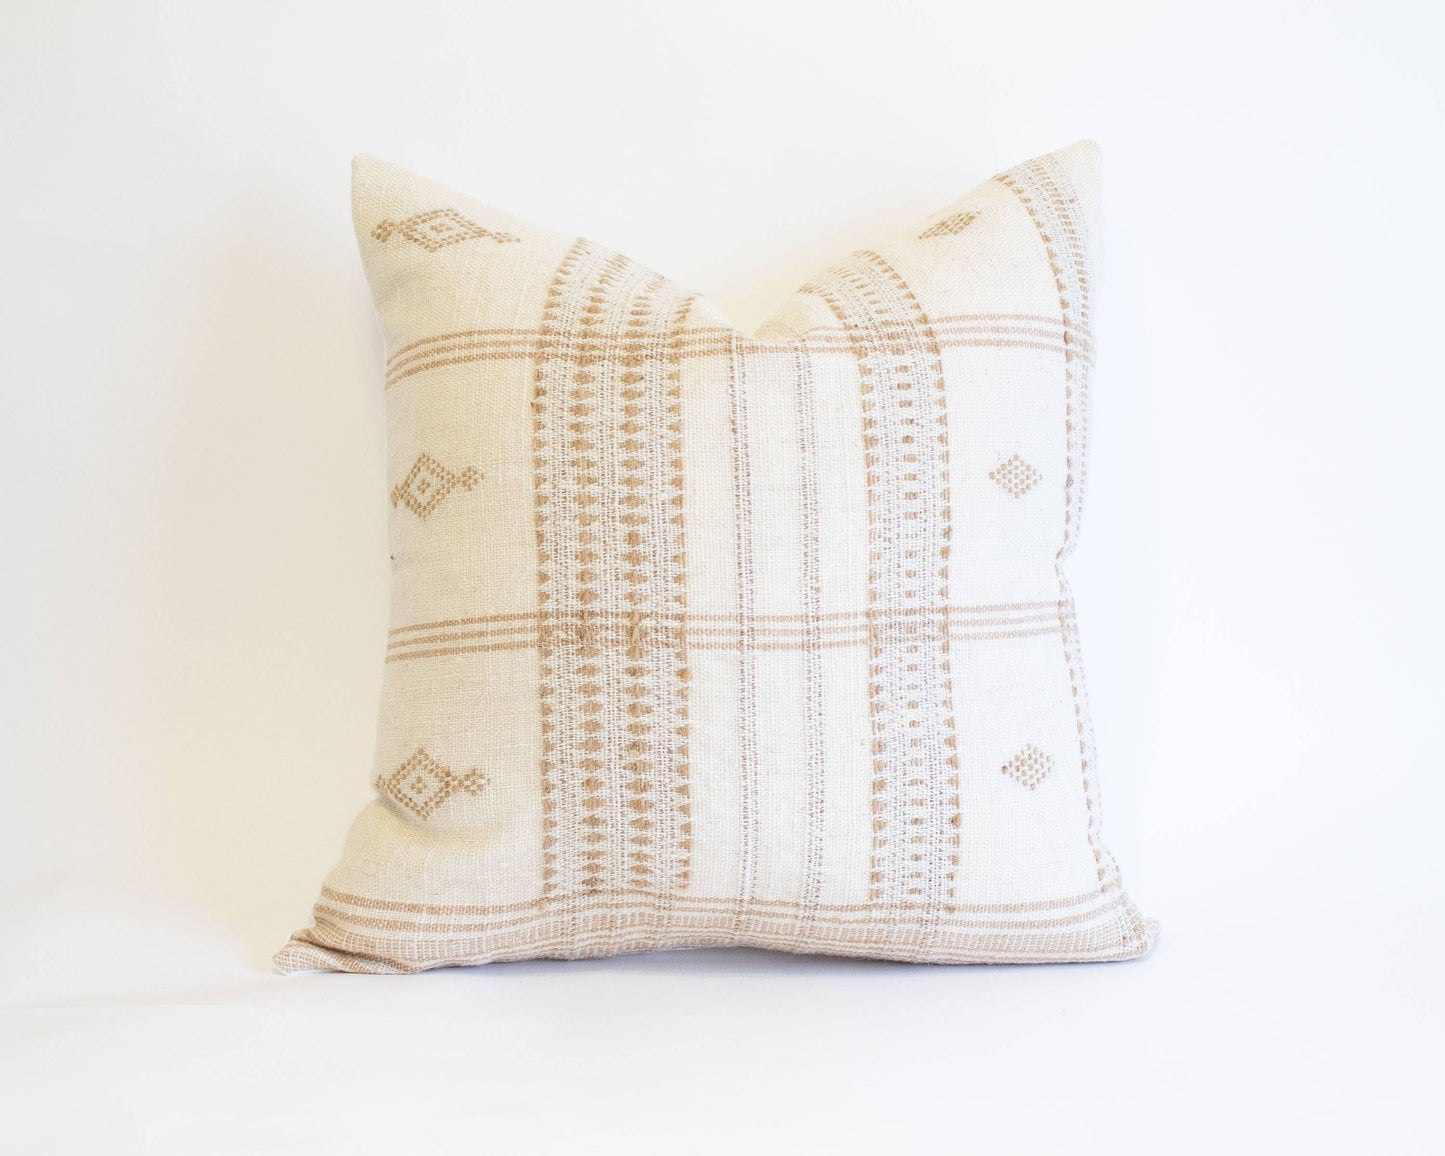 Handwoven Ivory & Tan Indian Wool Pillow Cover